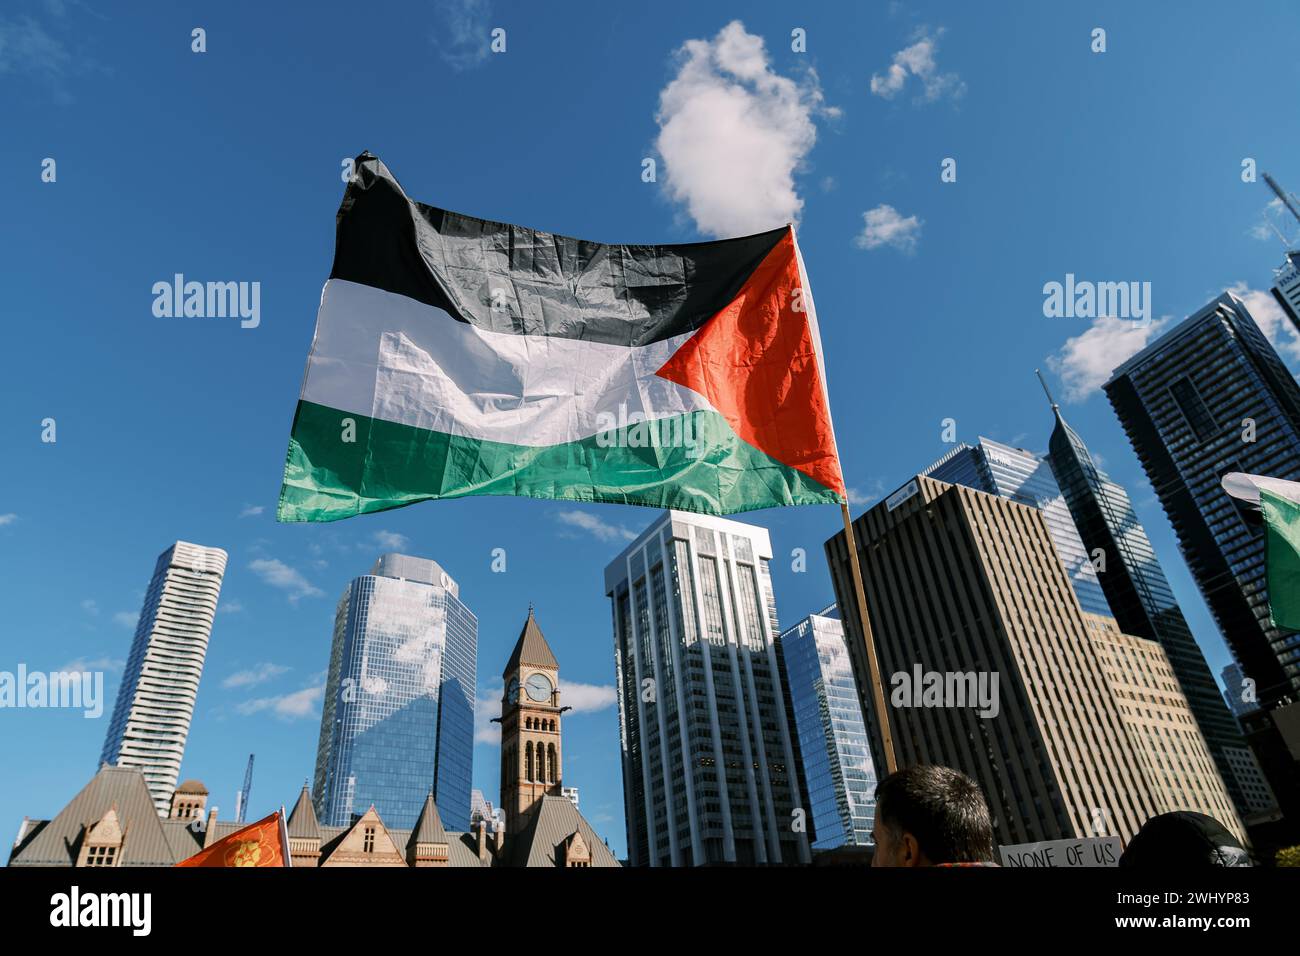 Toronto, Canada - 28 October 2023: Palestinian flag flies high amidst the city skyline, with skyscrapers and an old clock tower Stock Photo